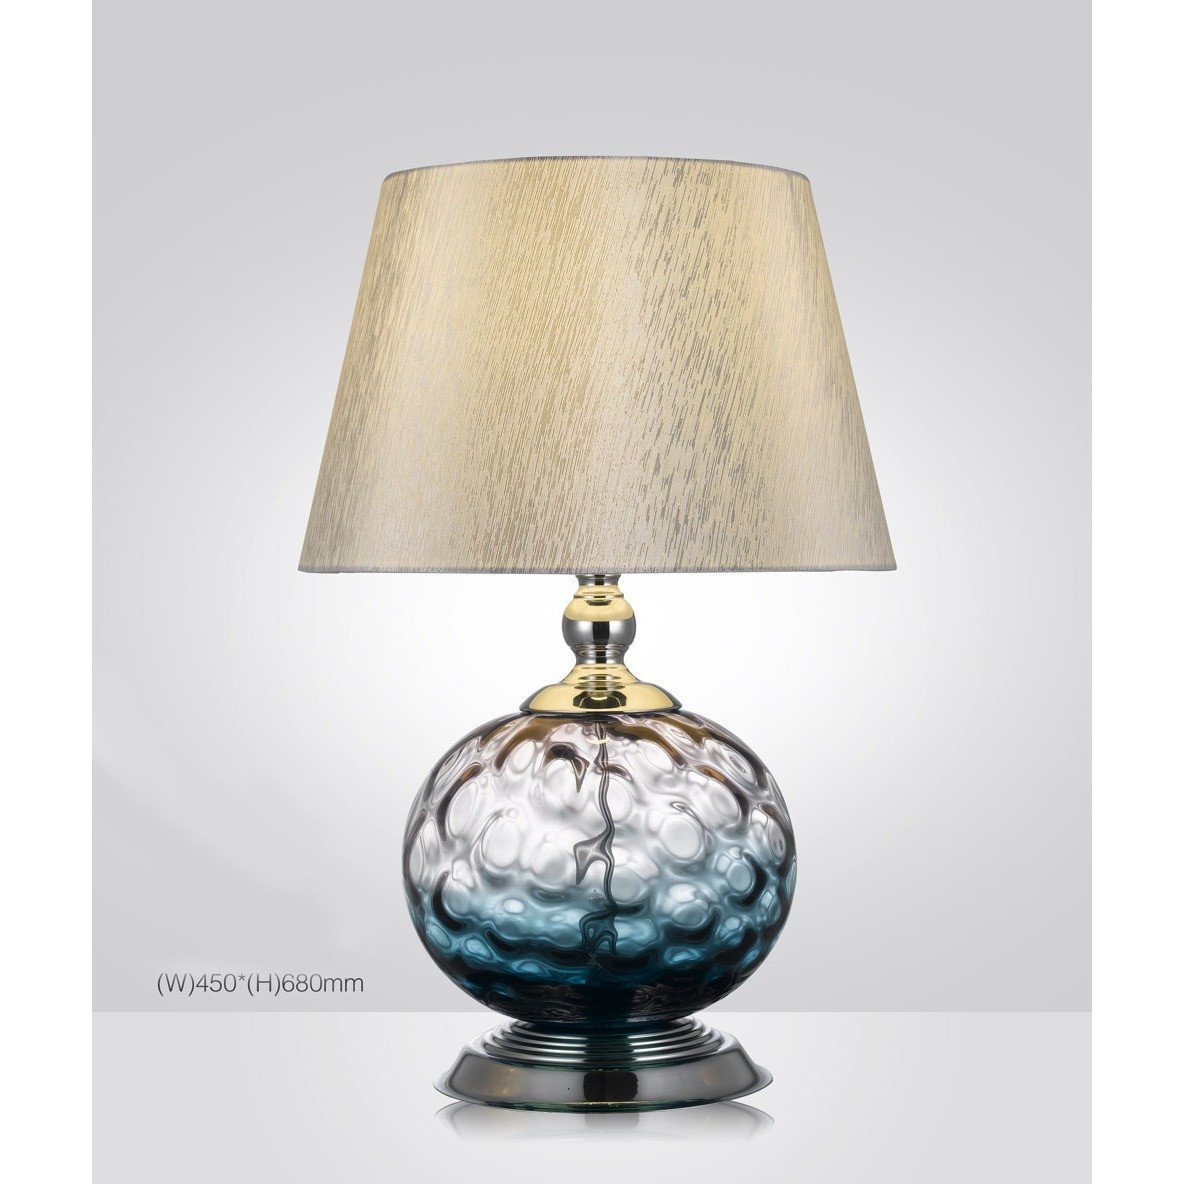 Urbanity Hand-Crafted Blown Glass Table Lamp With Shade - Italian Concept